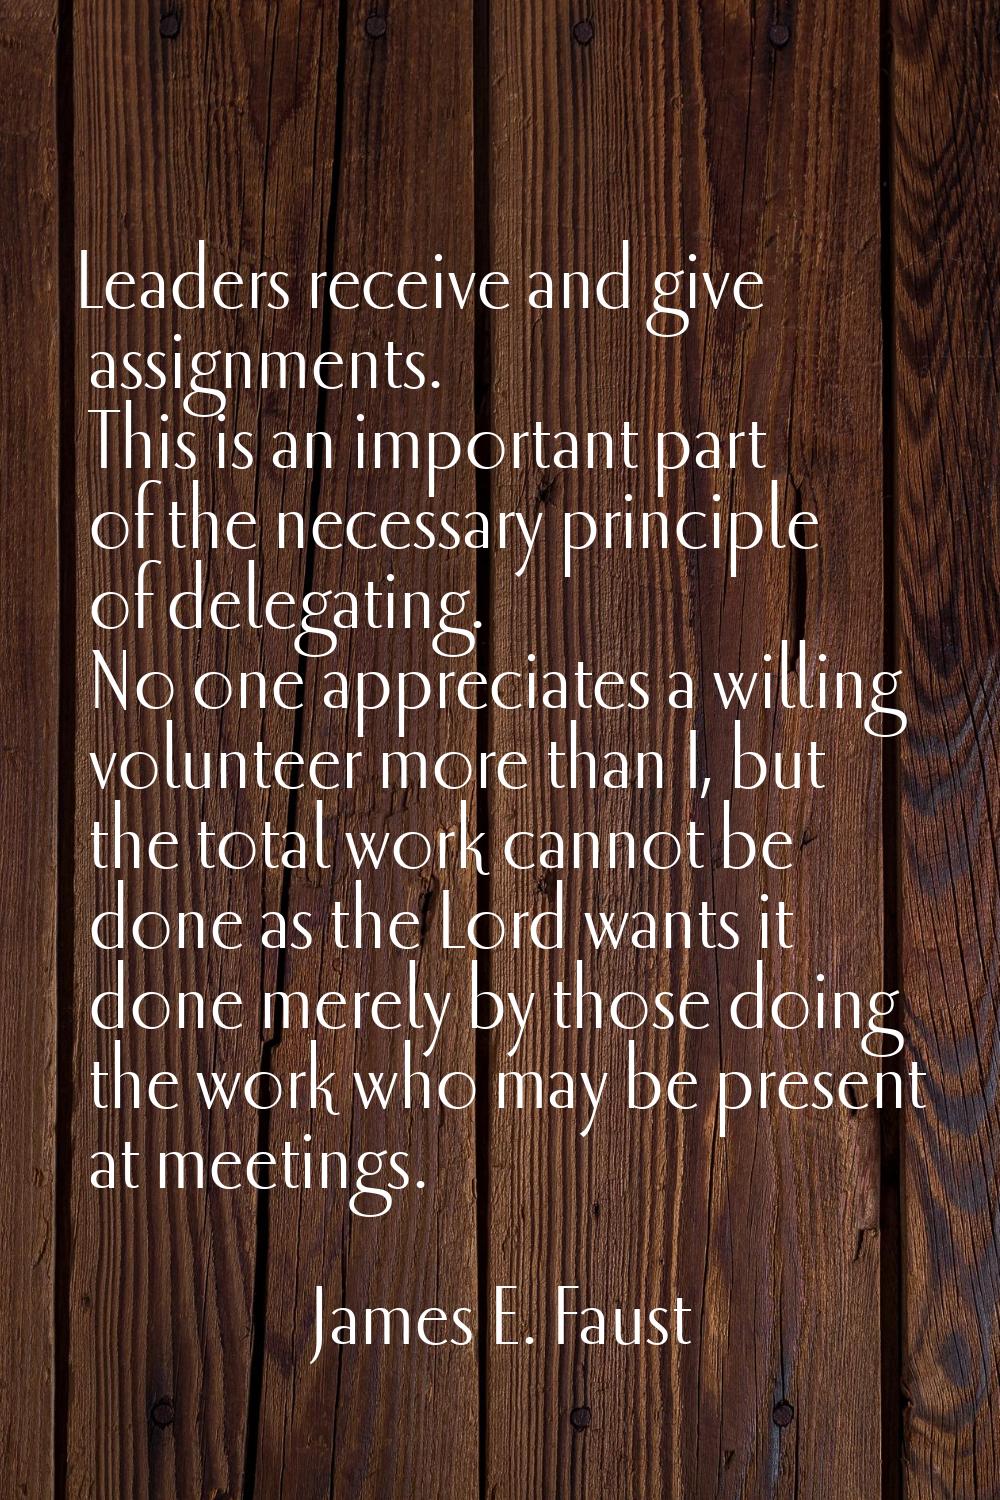 Leaders receive and give assignments. This is an important part of the necessary principle of deleg